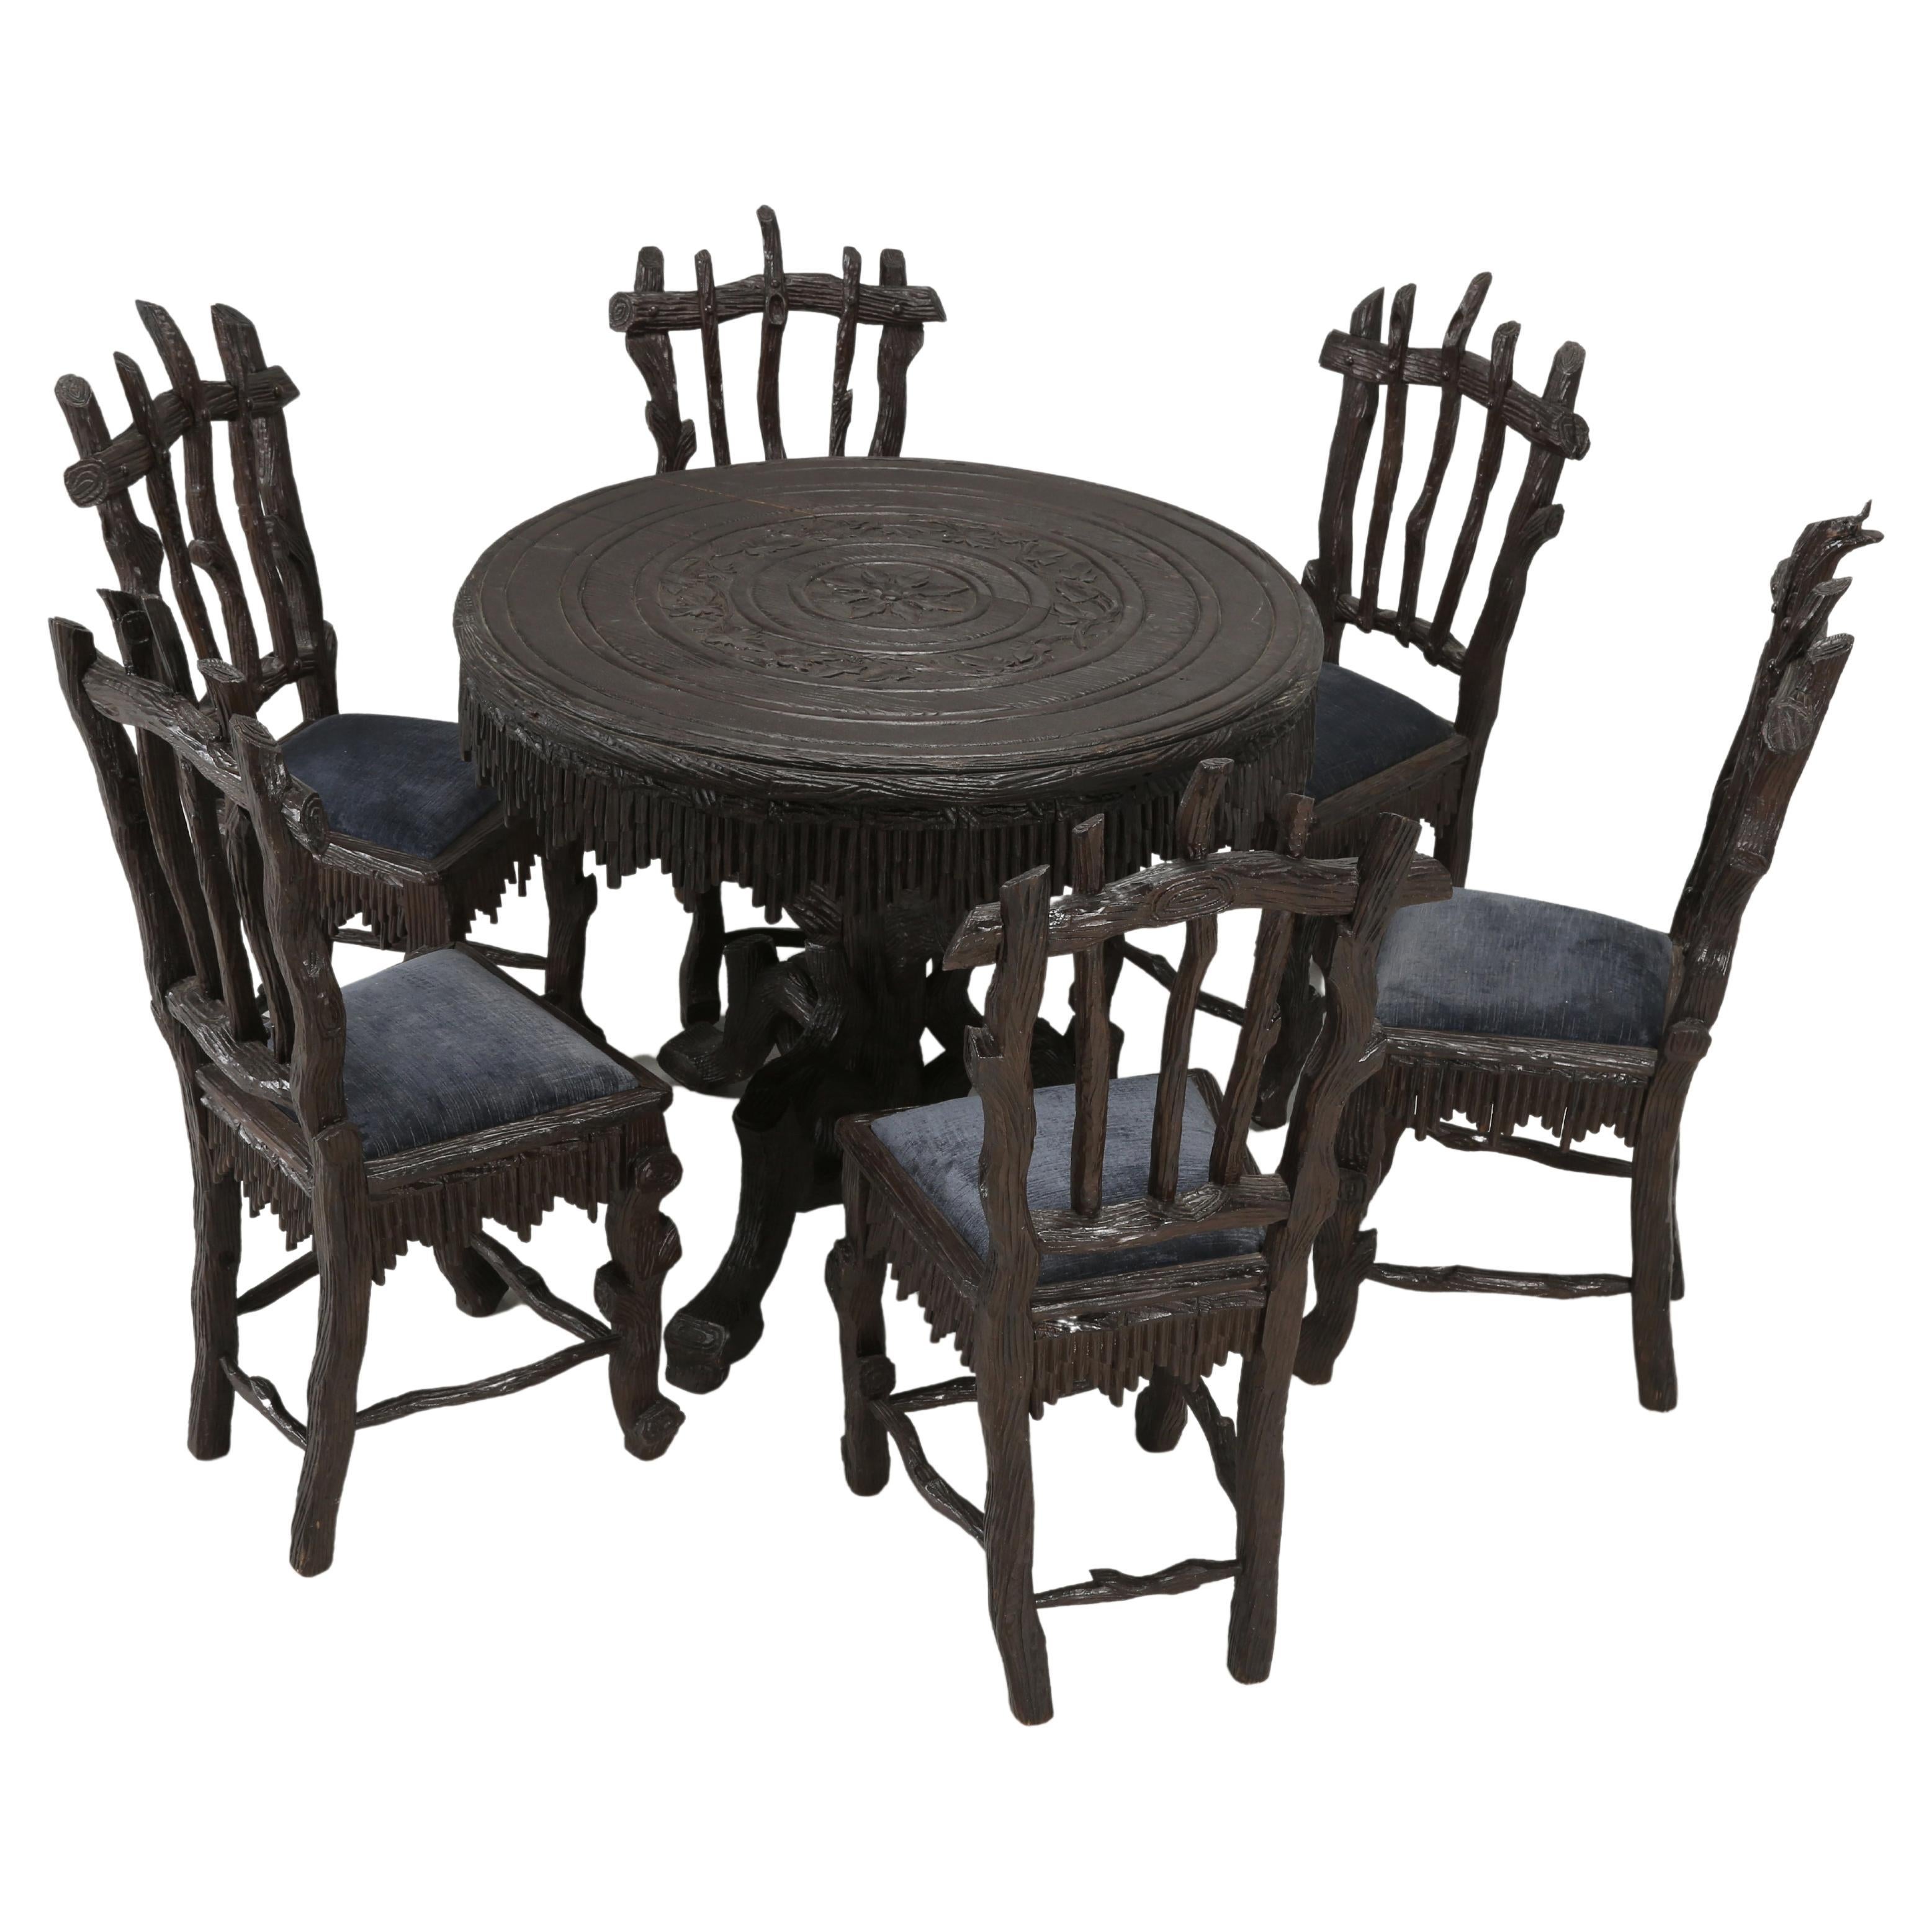 Black Forest Furniture Beautiful Small Dining Table, Game Table Matching Chairs